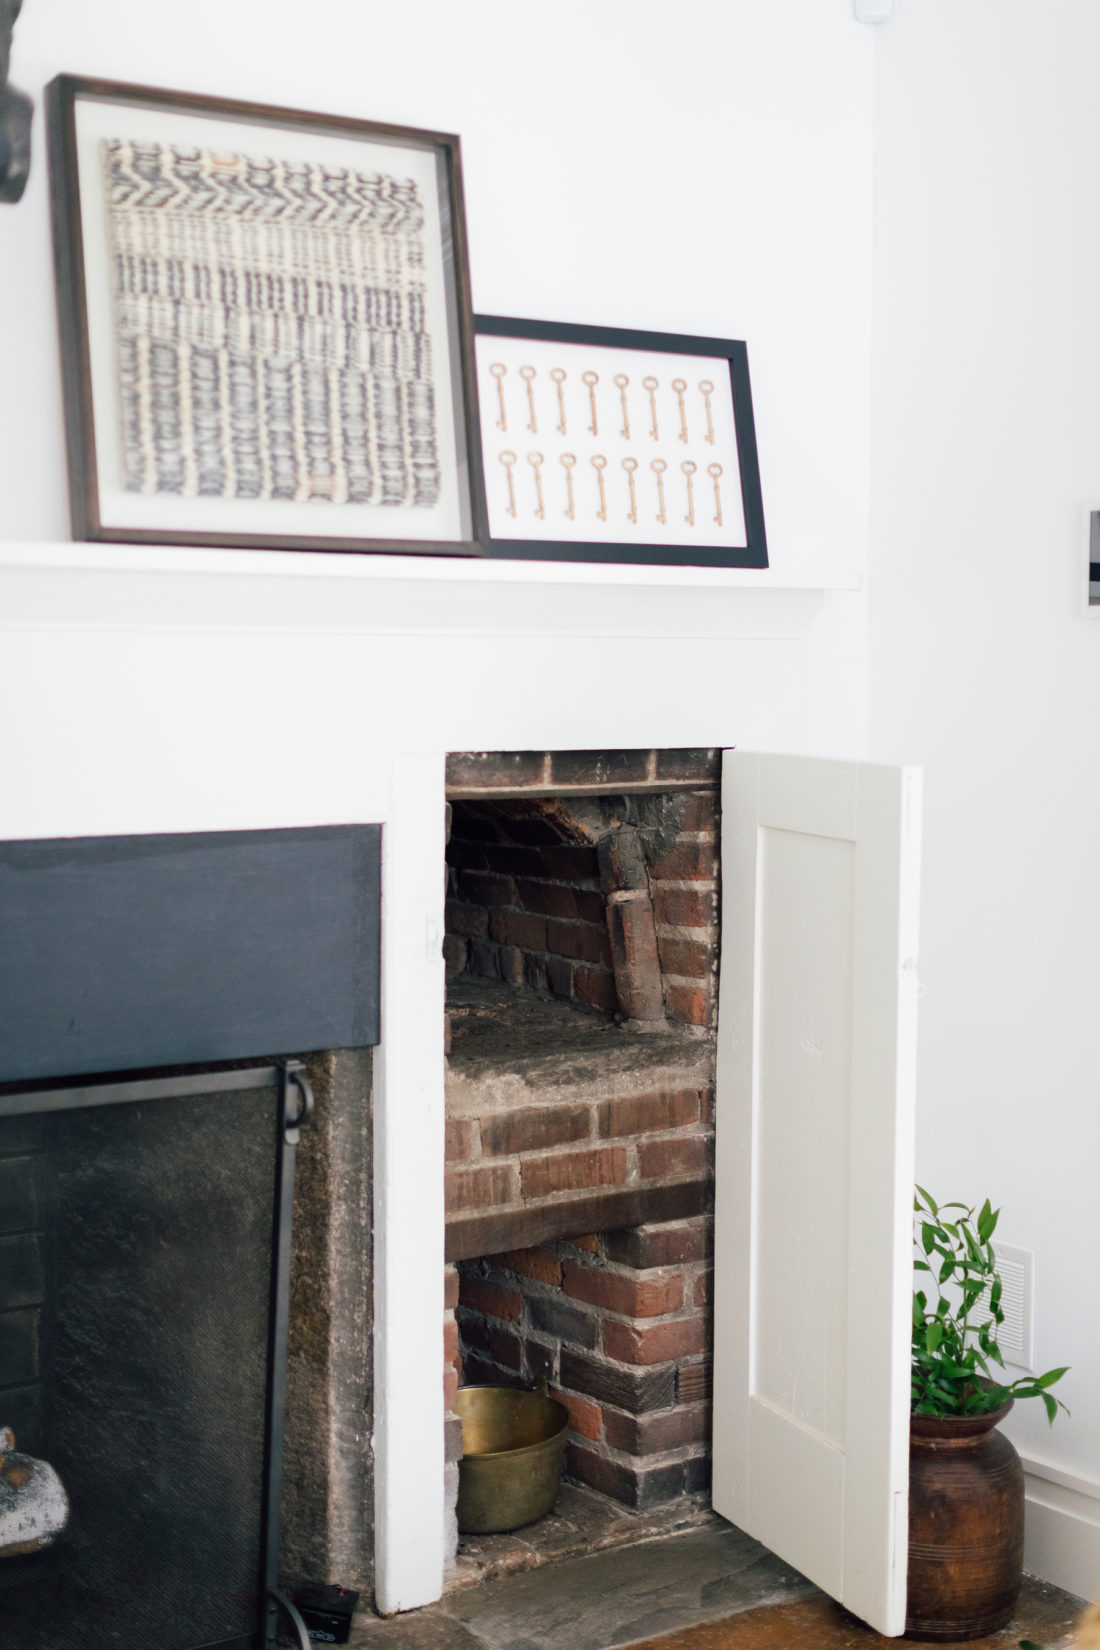 The fireplace and original wood oven are both on display in Eva Amurri Martino's renovated Connecticut kitchen